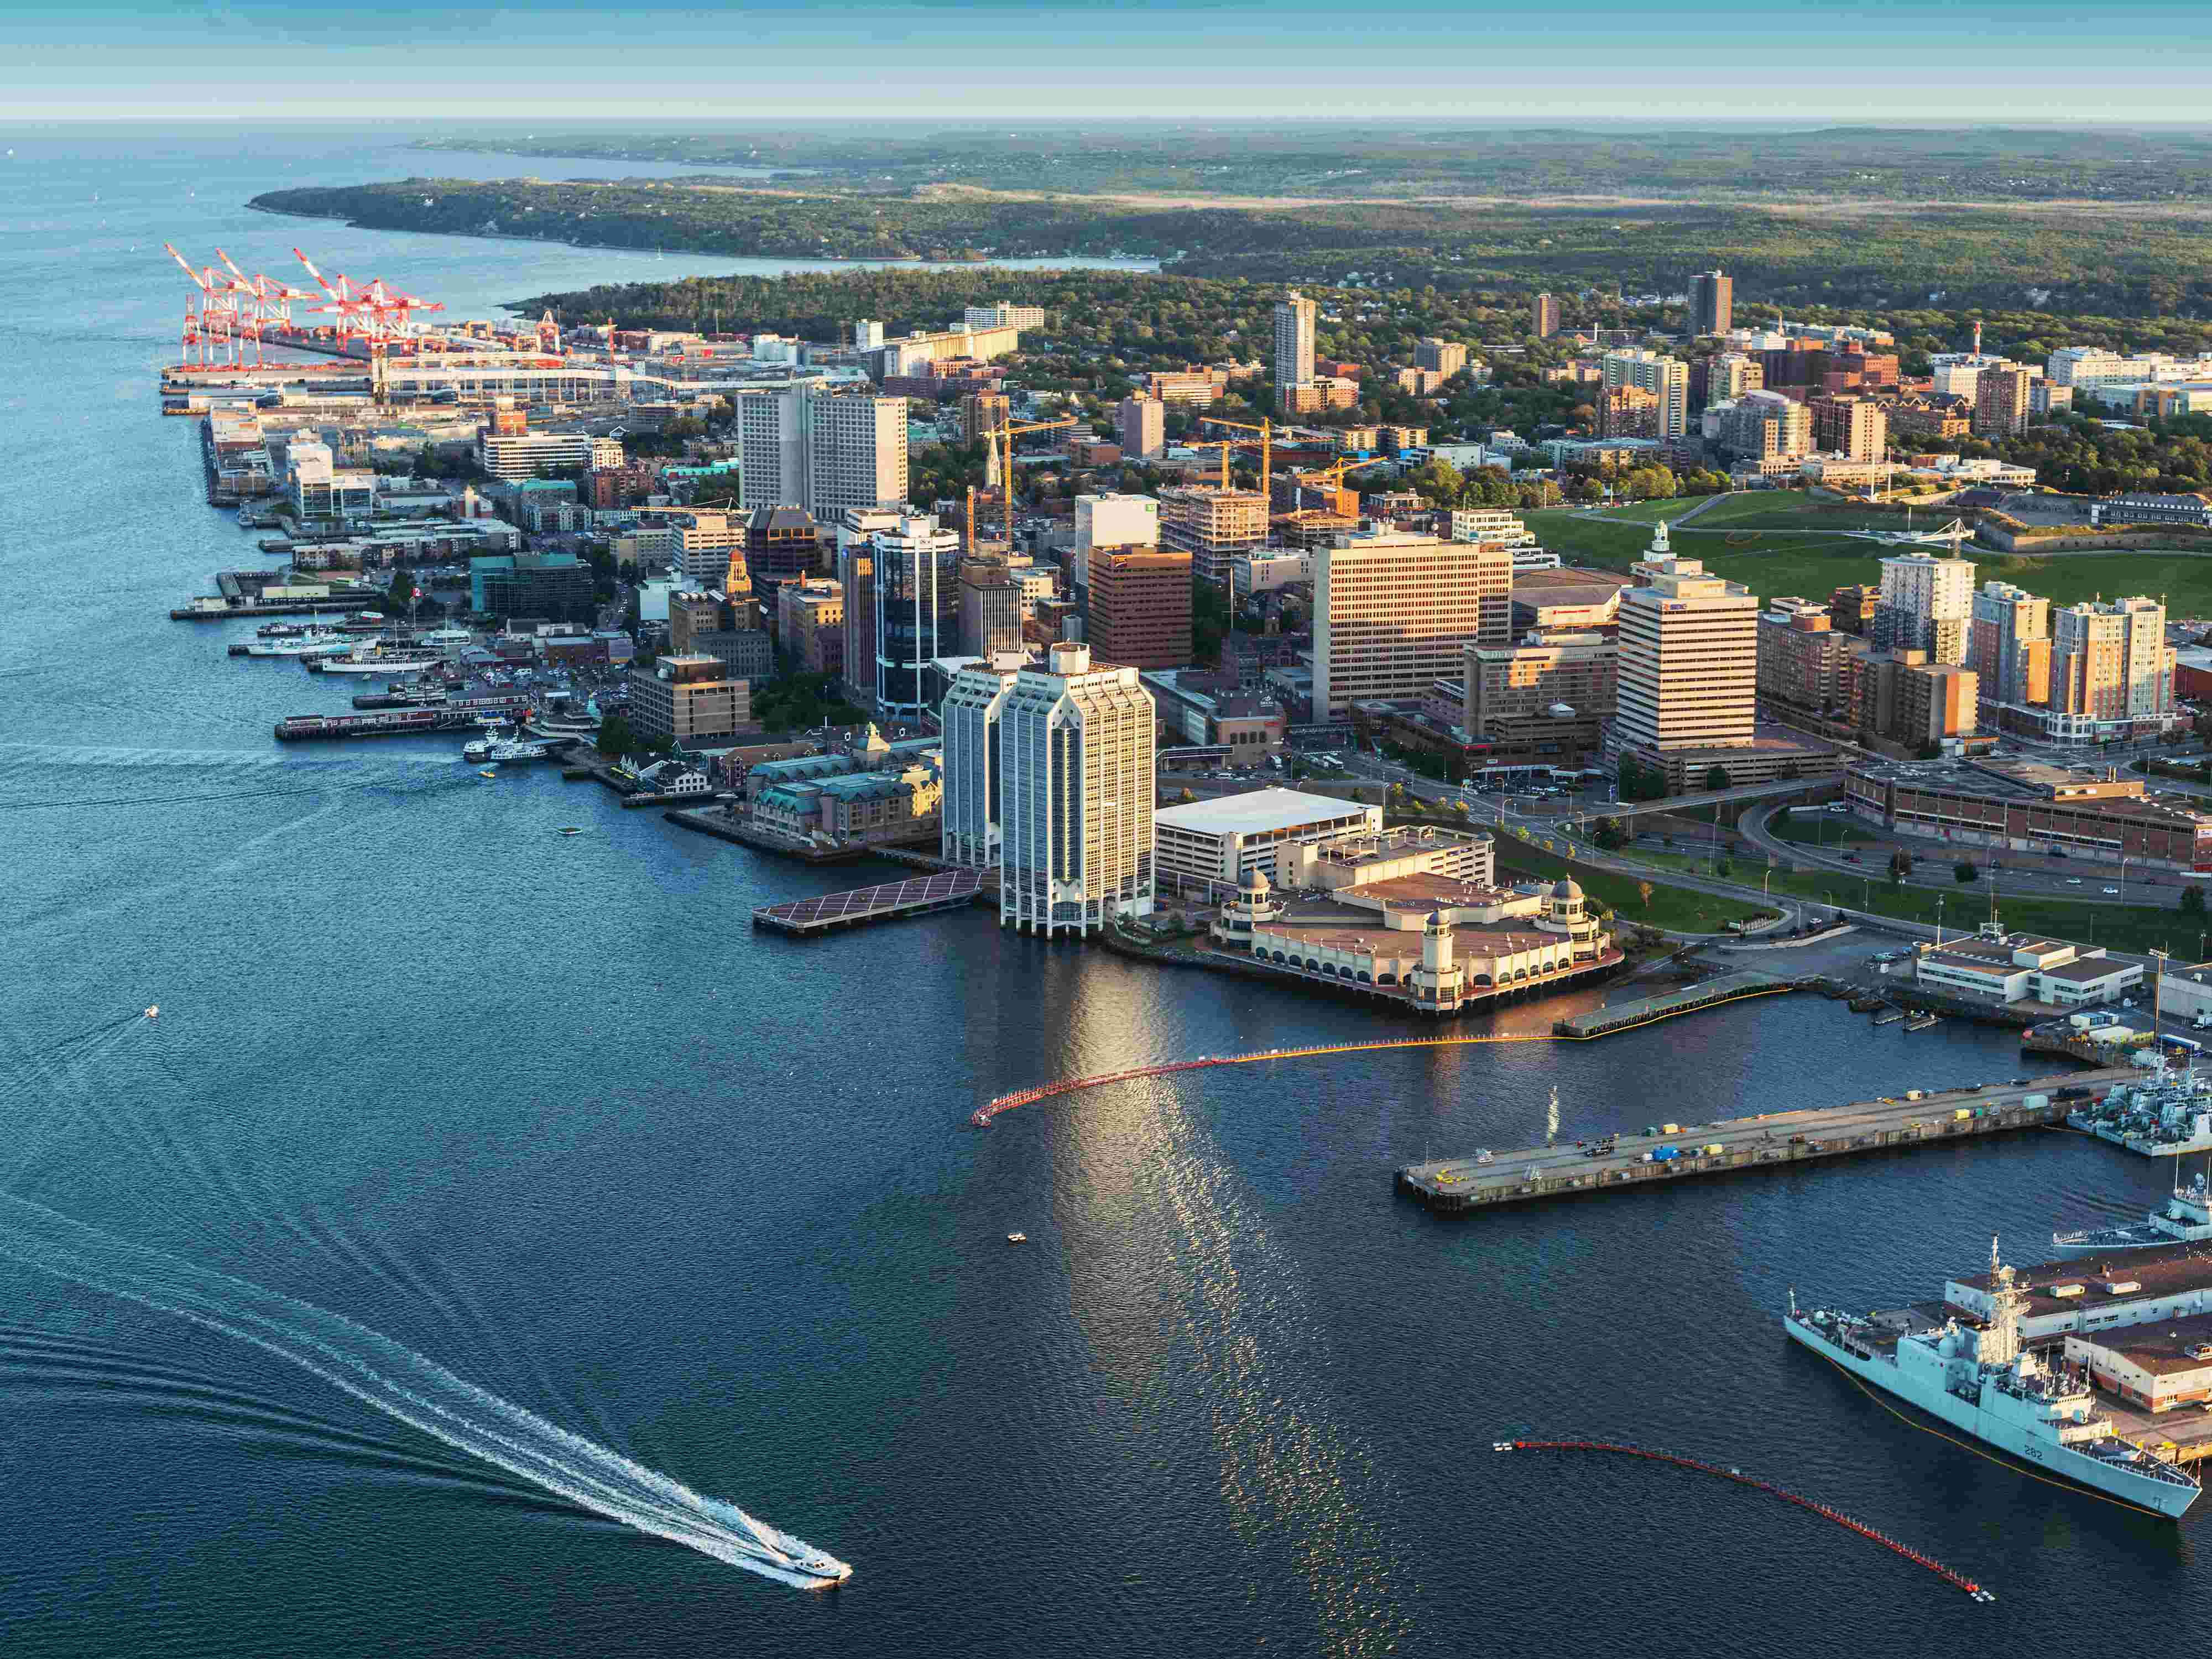 Aerial view of the Waterfront of Halifax-Bedford, Nova Scotia